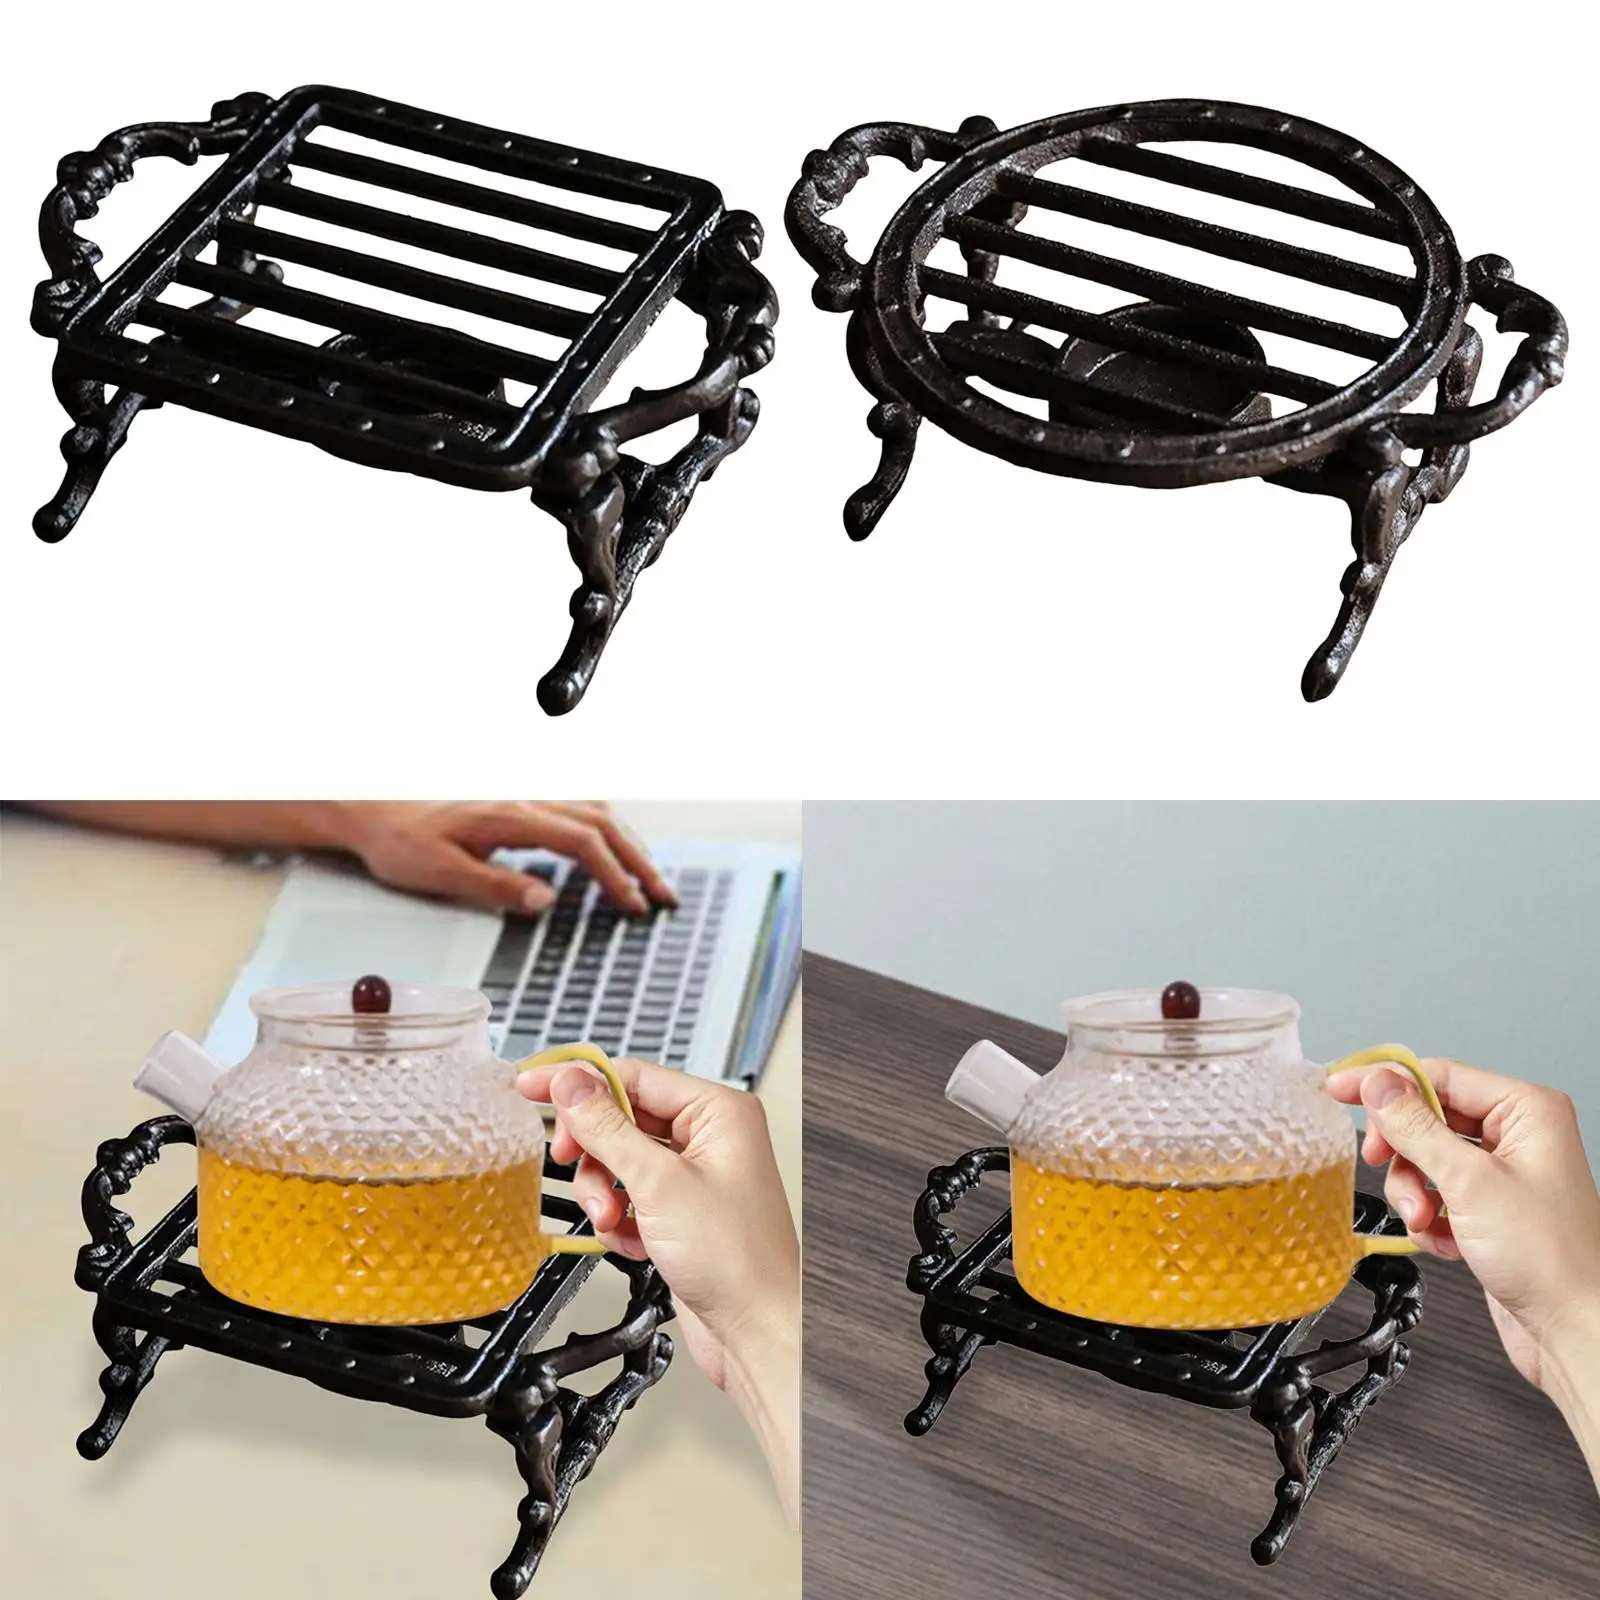 Portable Teapot Warmer Holder Decorative Candle Holder Stand Candle Warmer Heavy Duty Teapot Warmer for Home